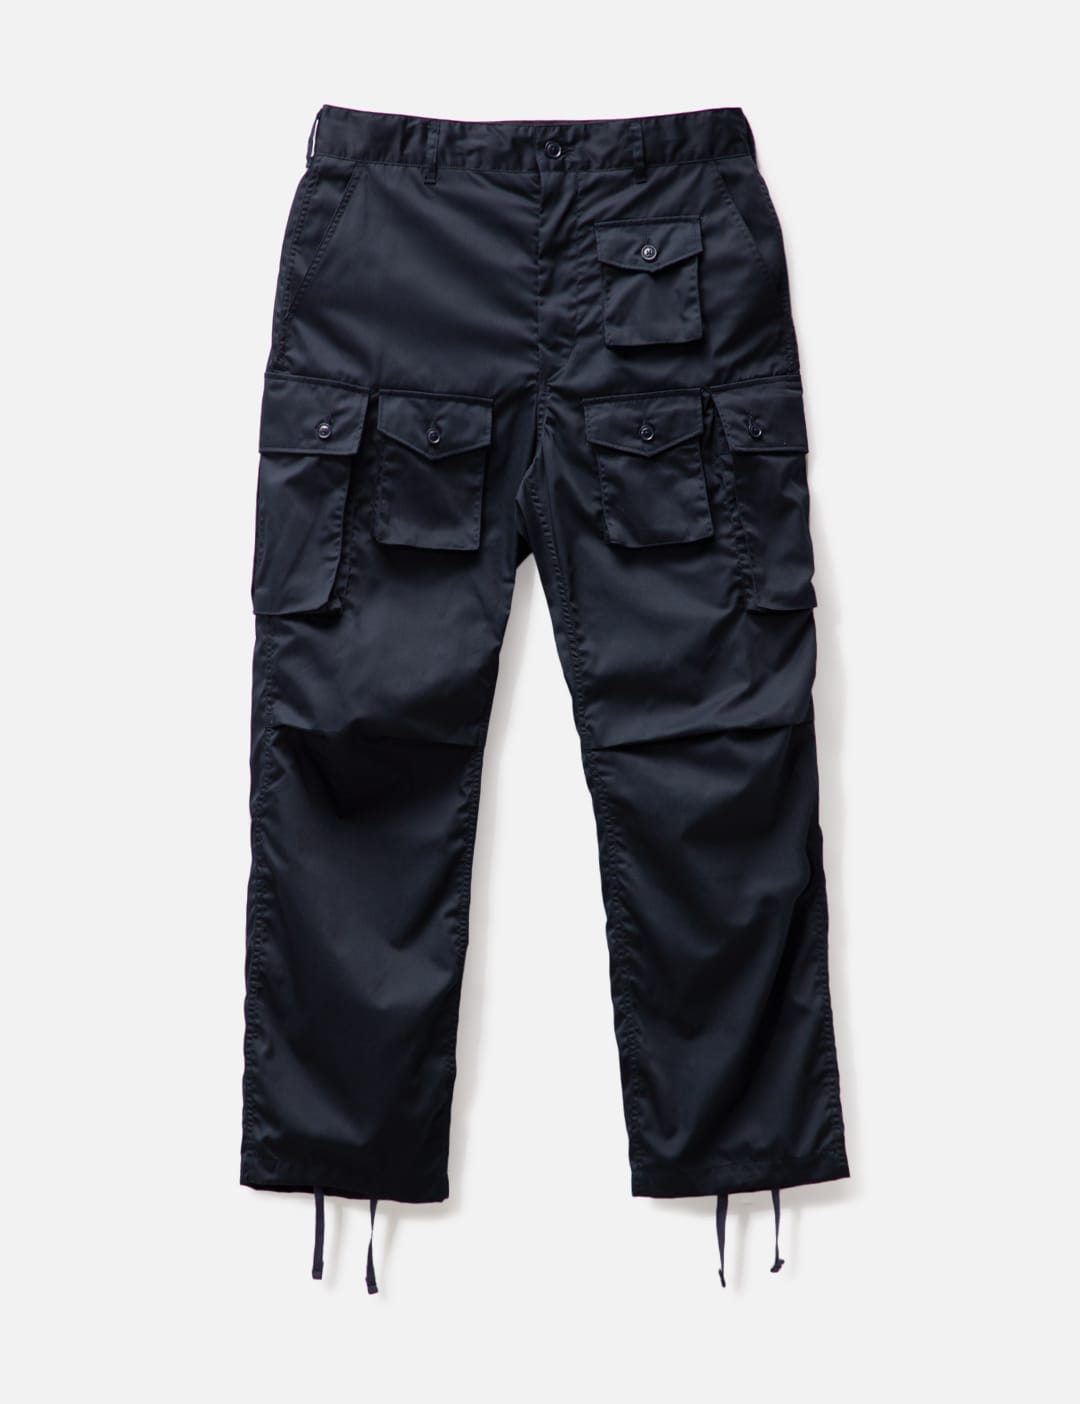 Engineered Garments - FA PANT | HBX - Globally Curated Fashion and